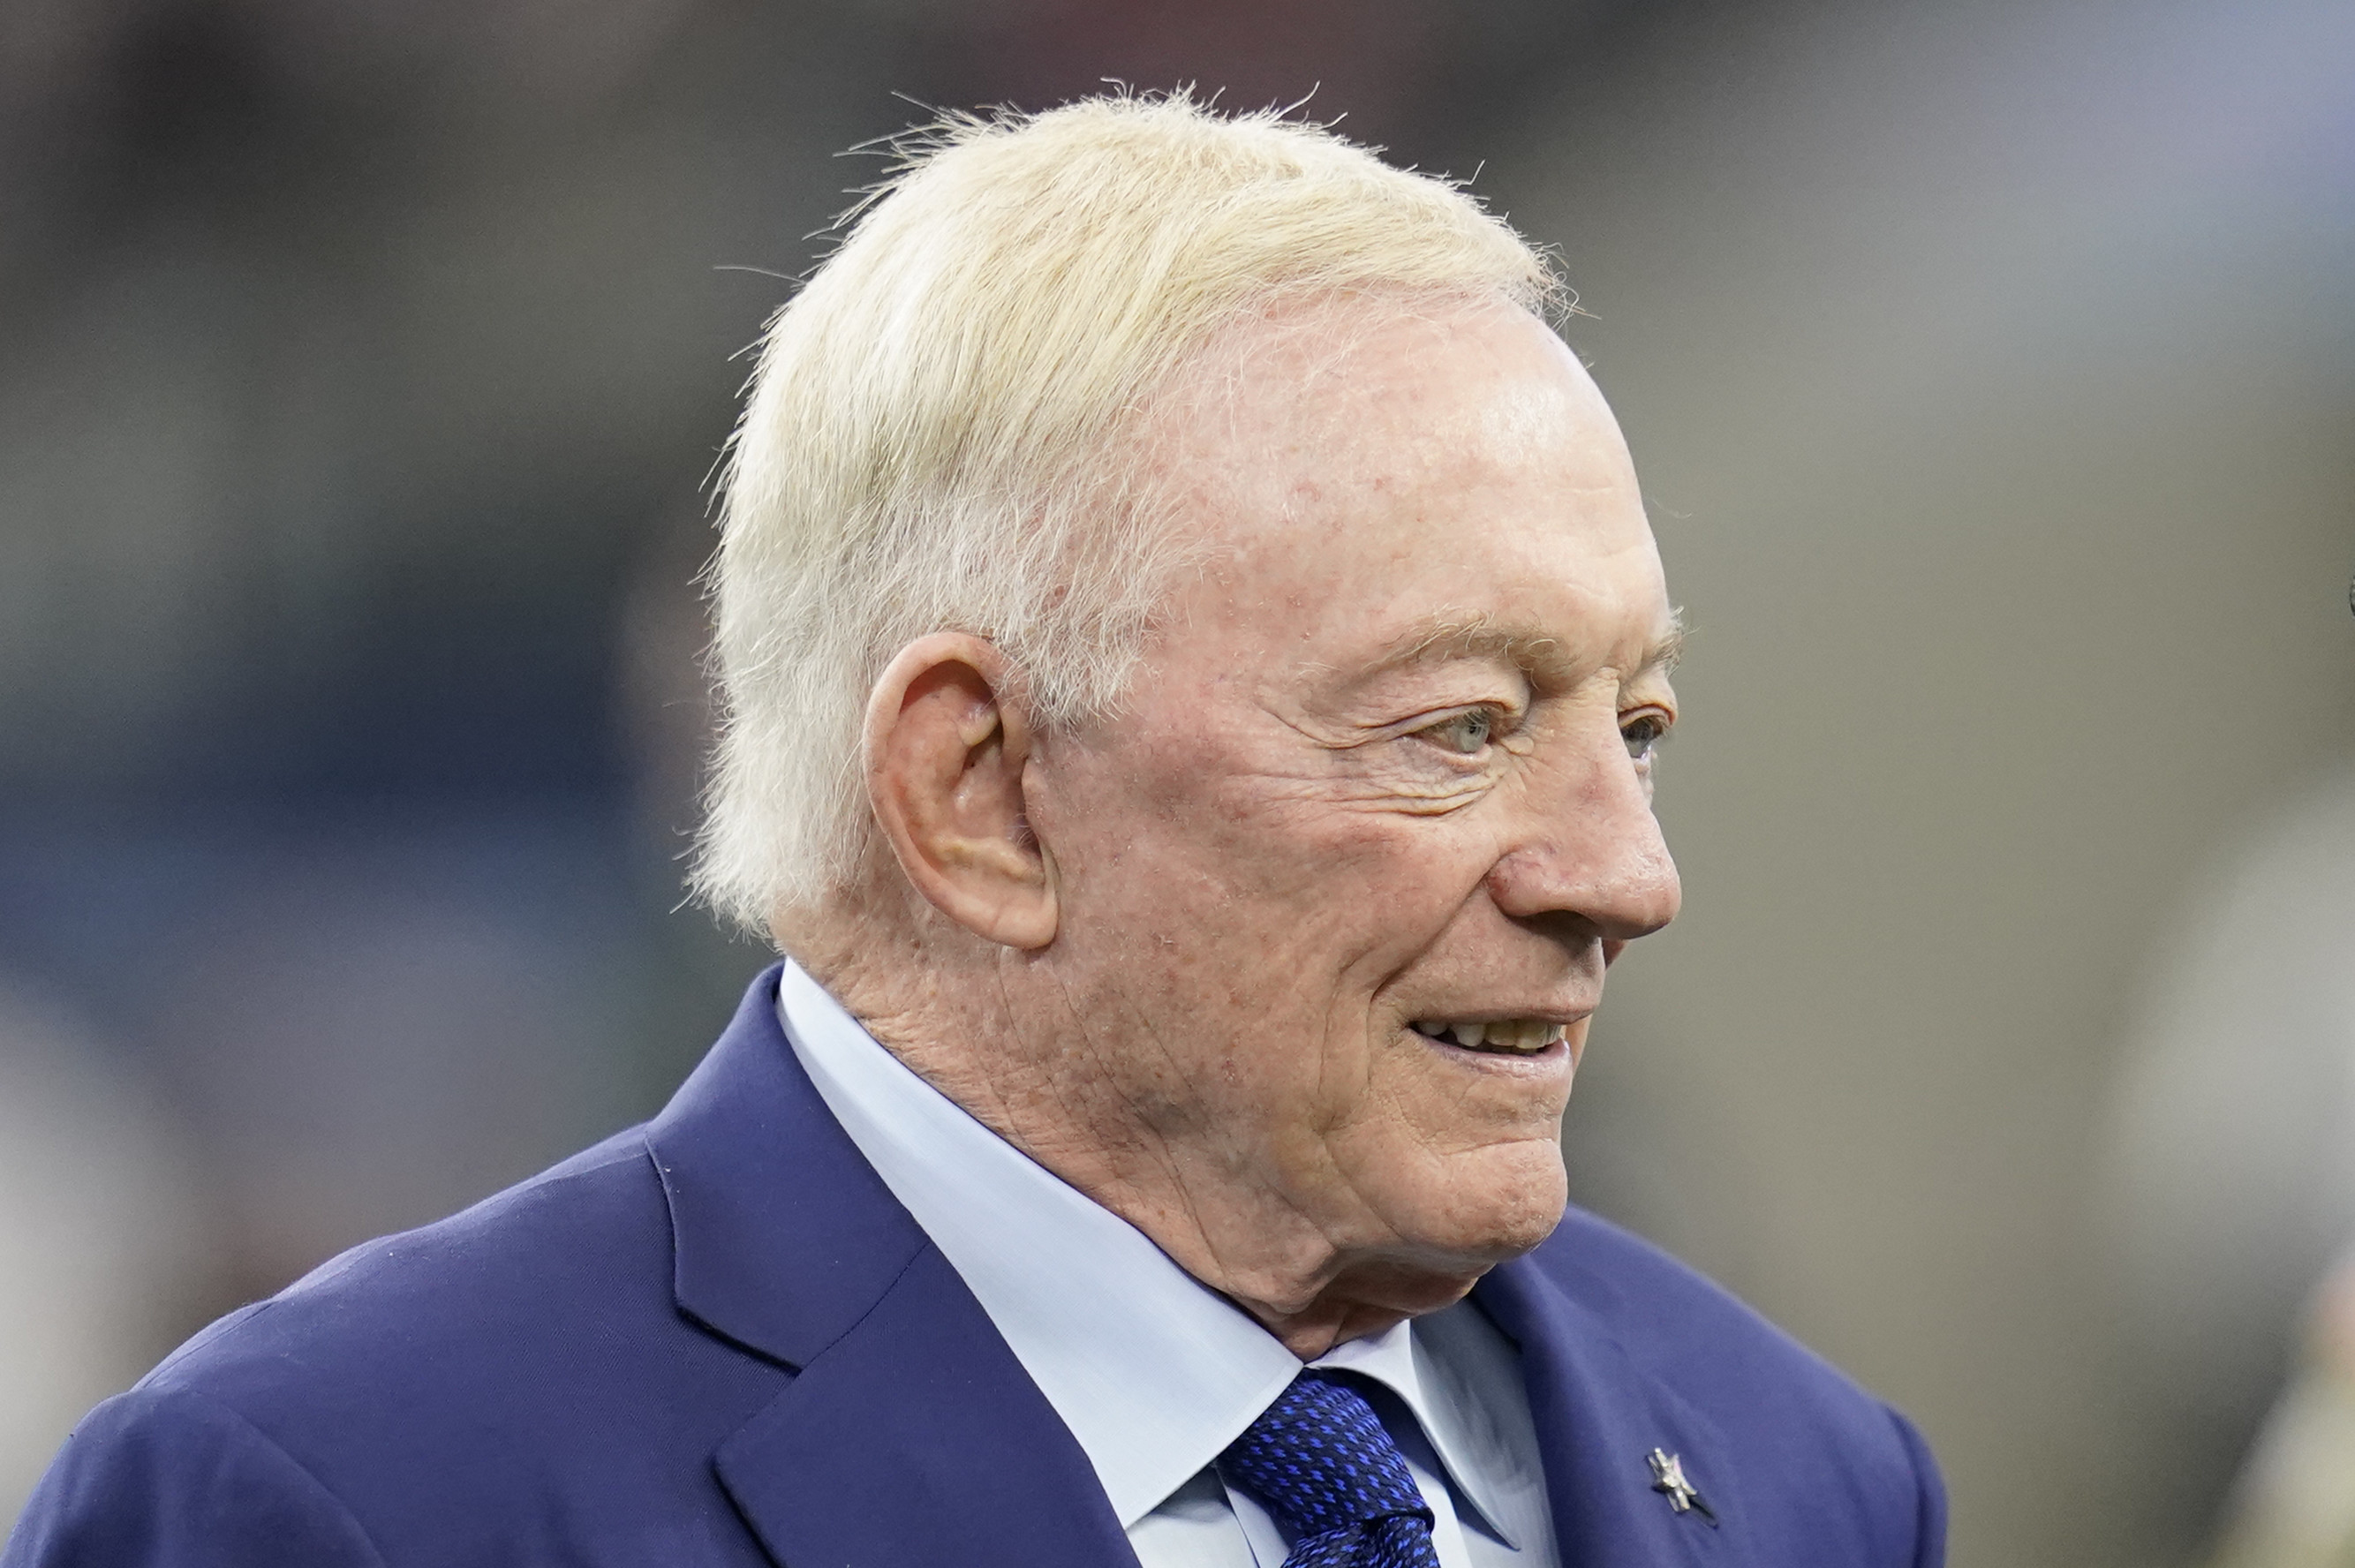 Cowboys' Jerry Jones Sued by 25-Year-Old Woman over Alleged Paternity